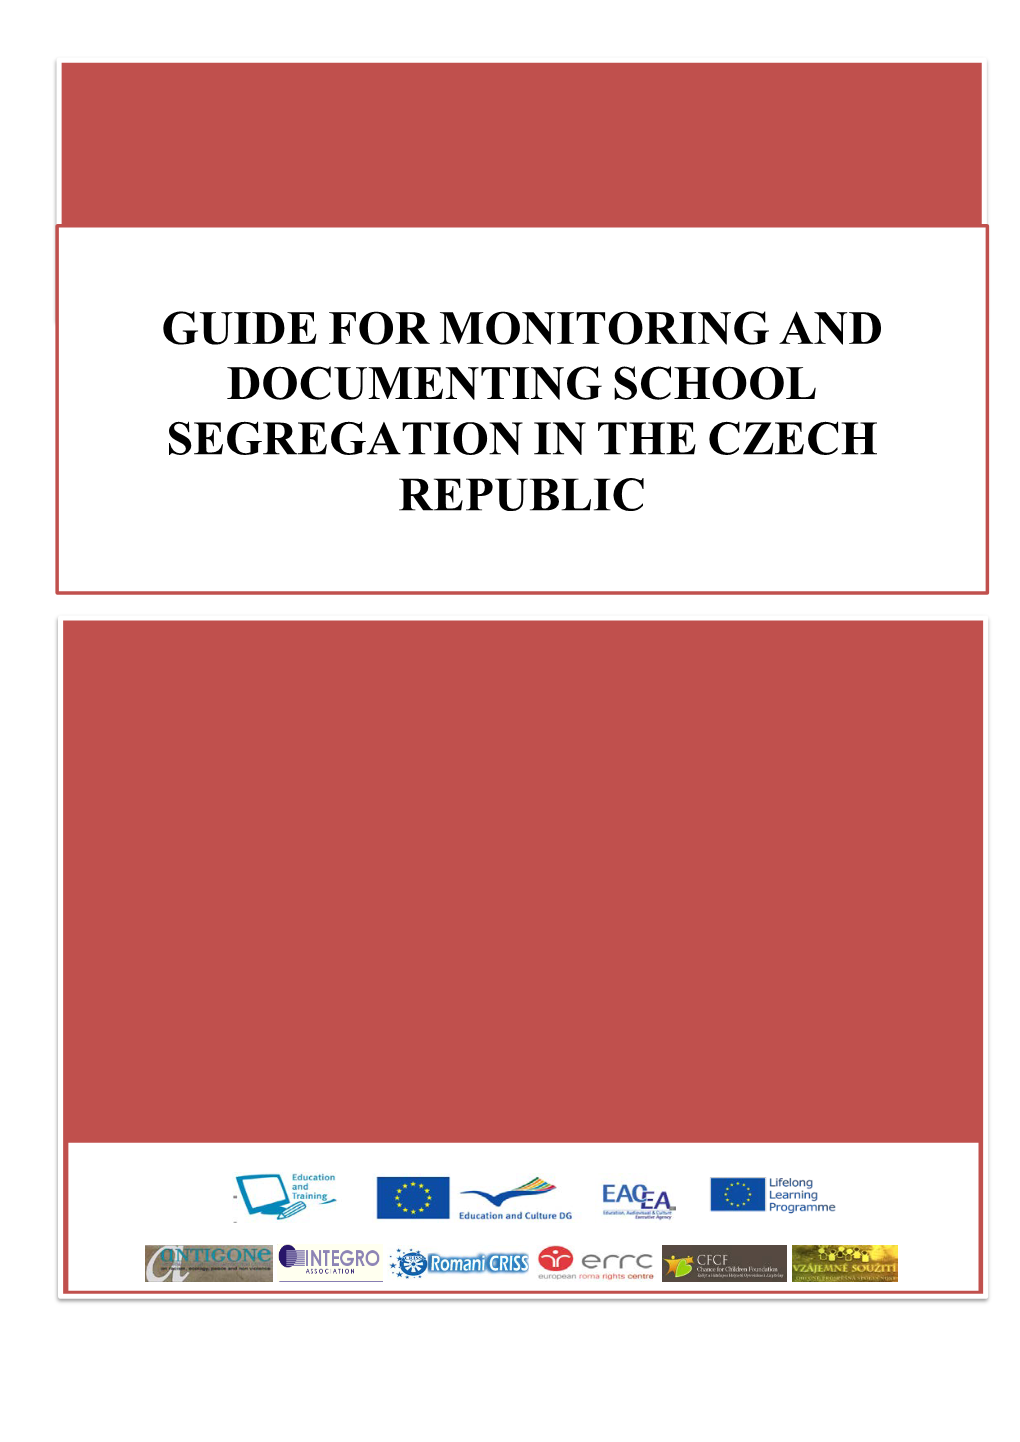 Guide for Monitoring and Documenting School Segregation in the Czech Republic